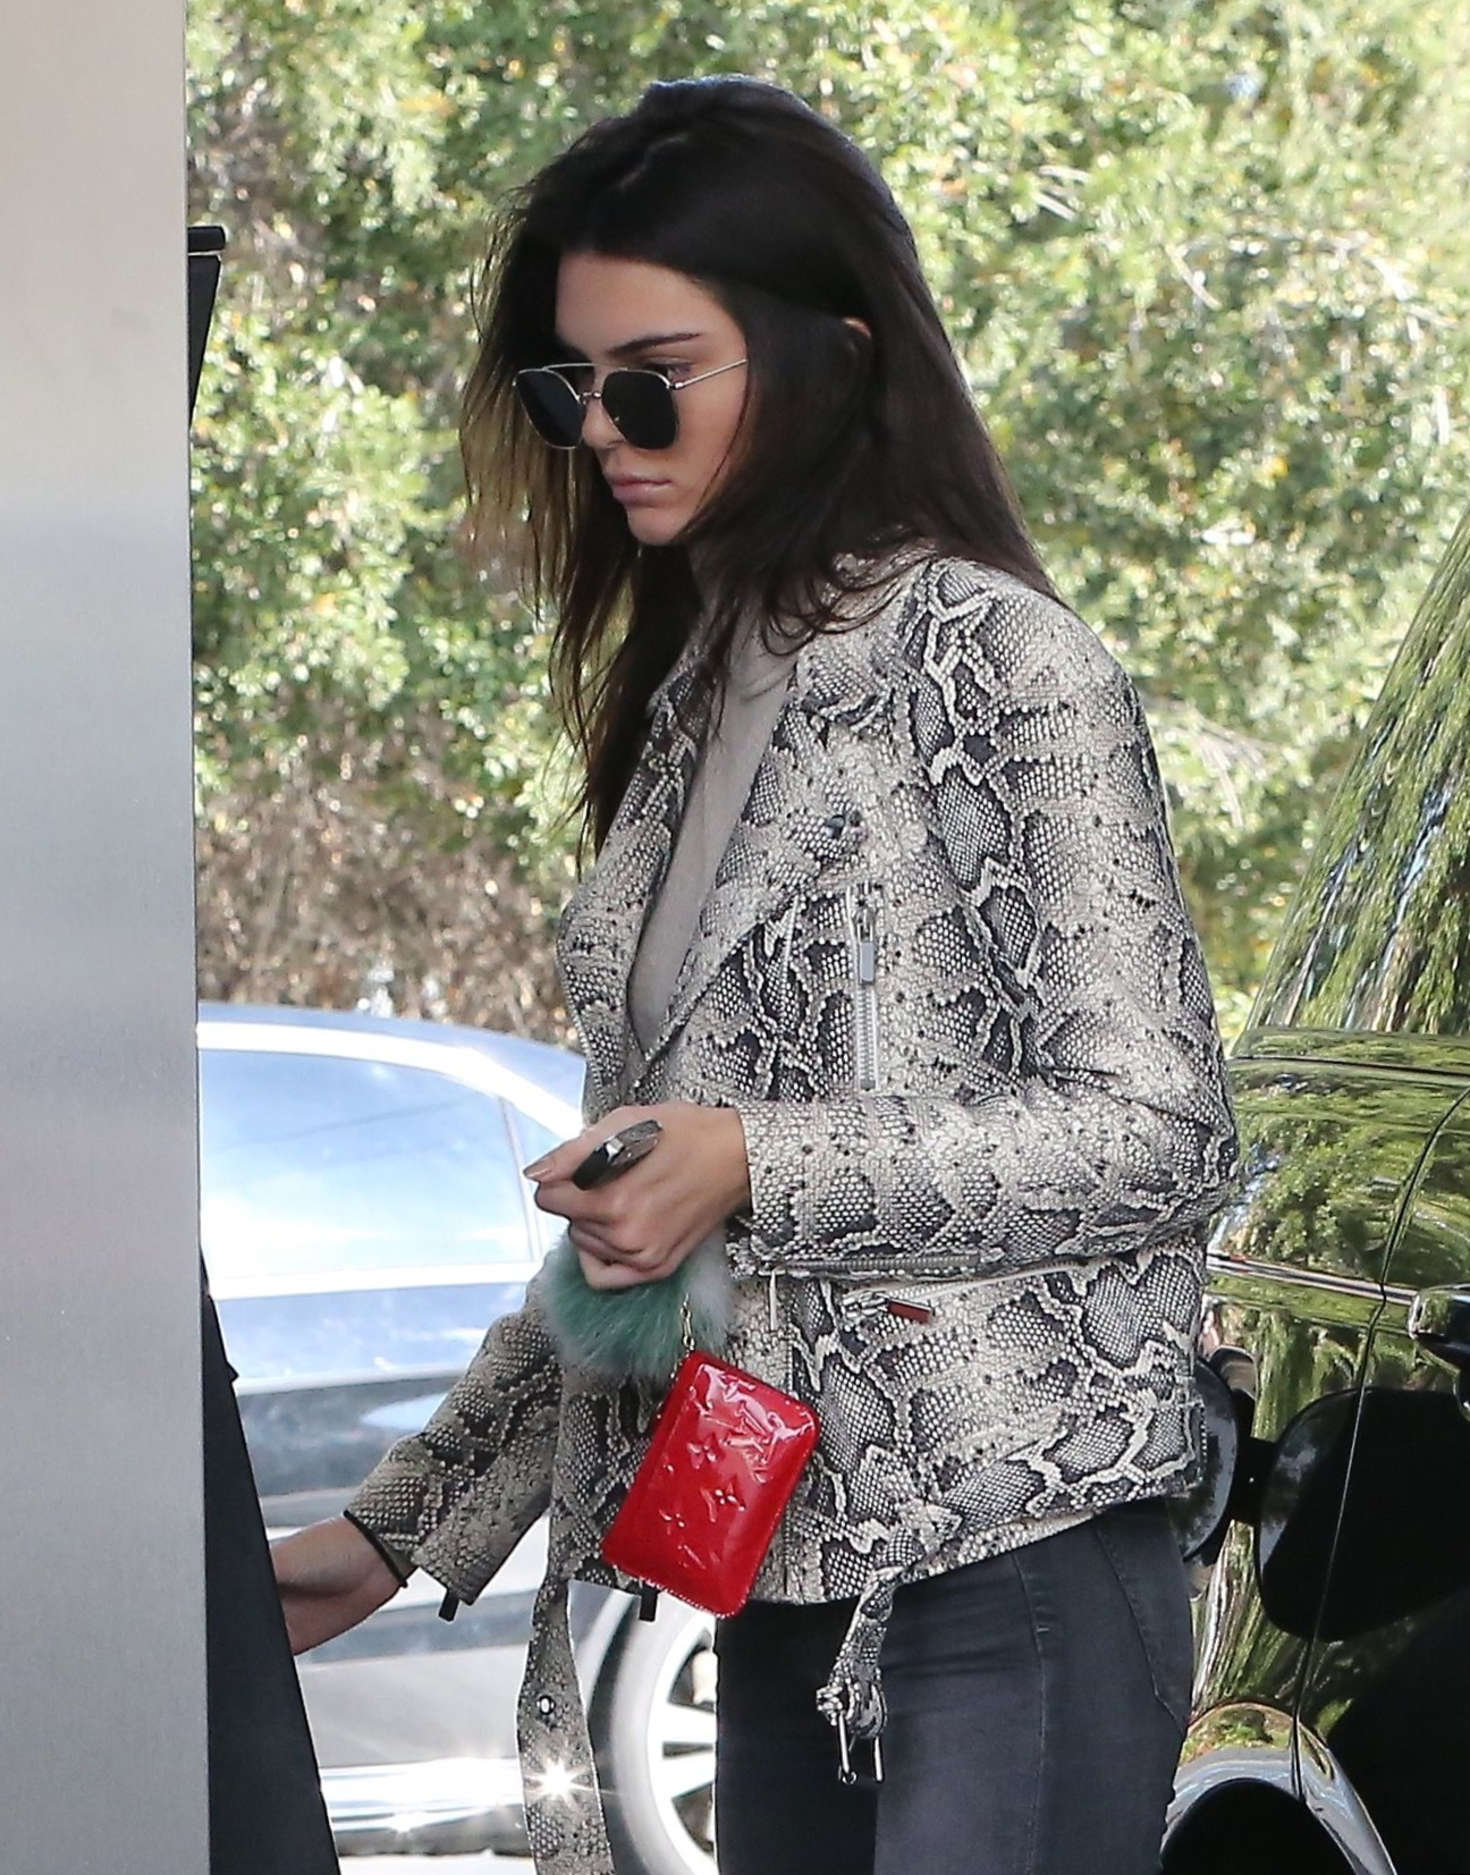 Kendall Jenner pumping gas 09